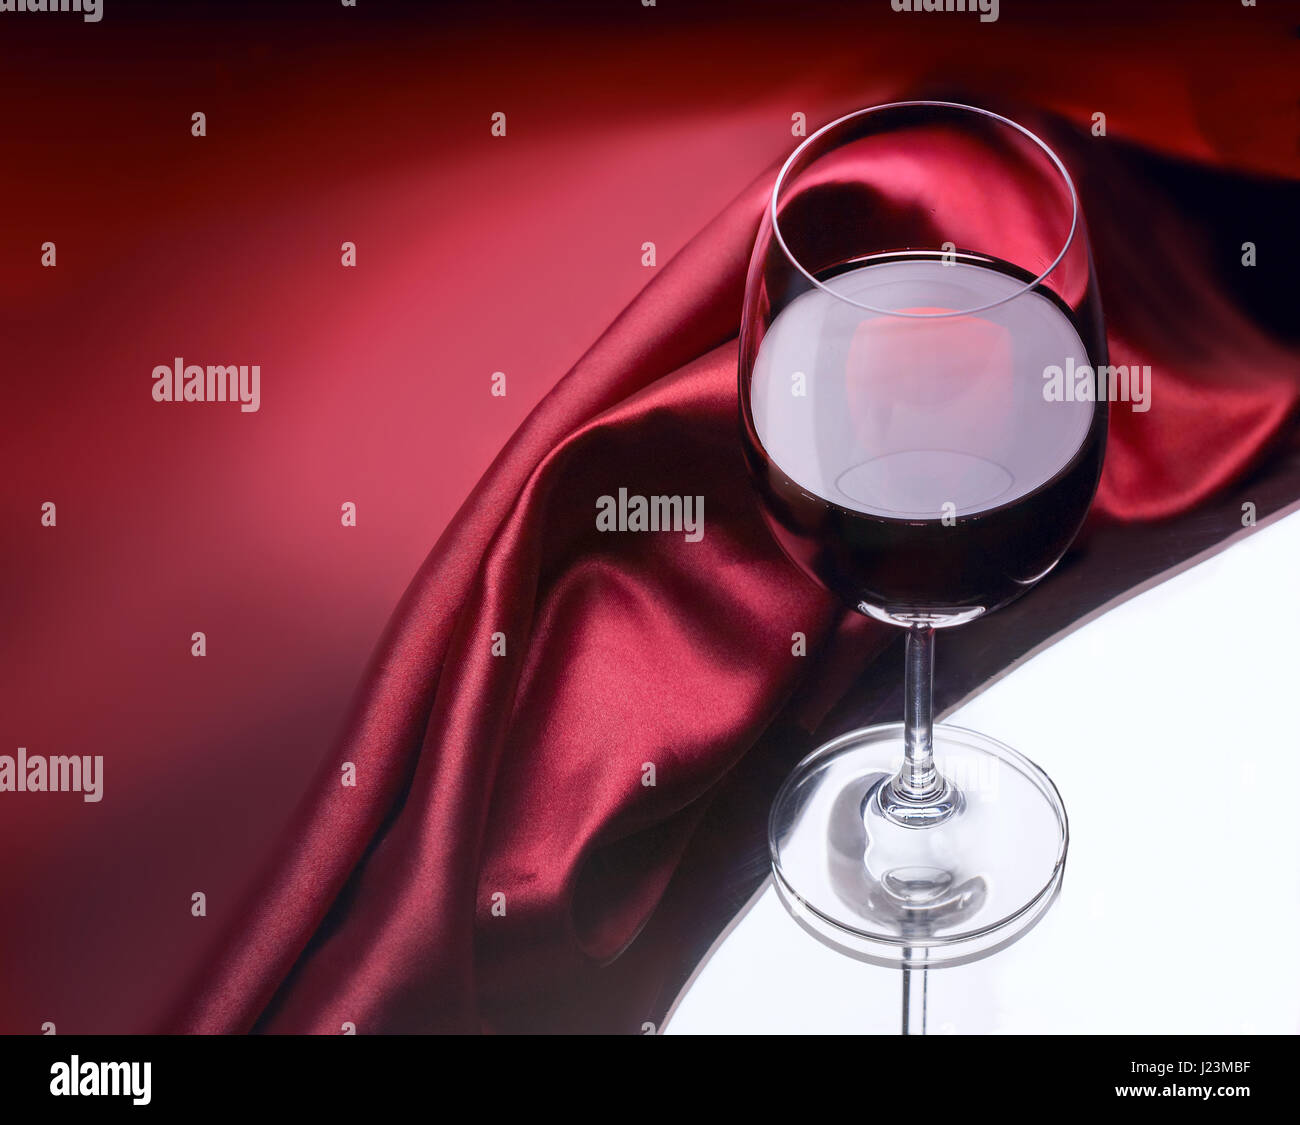 Wineglass of red wine against dark red glossy cloth background Stock Photo